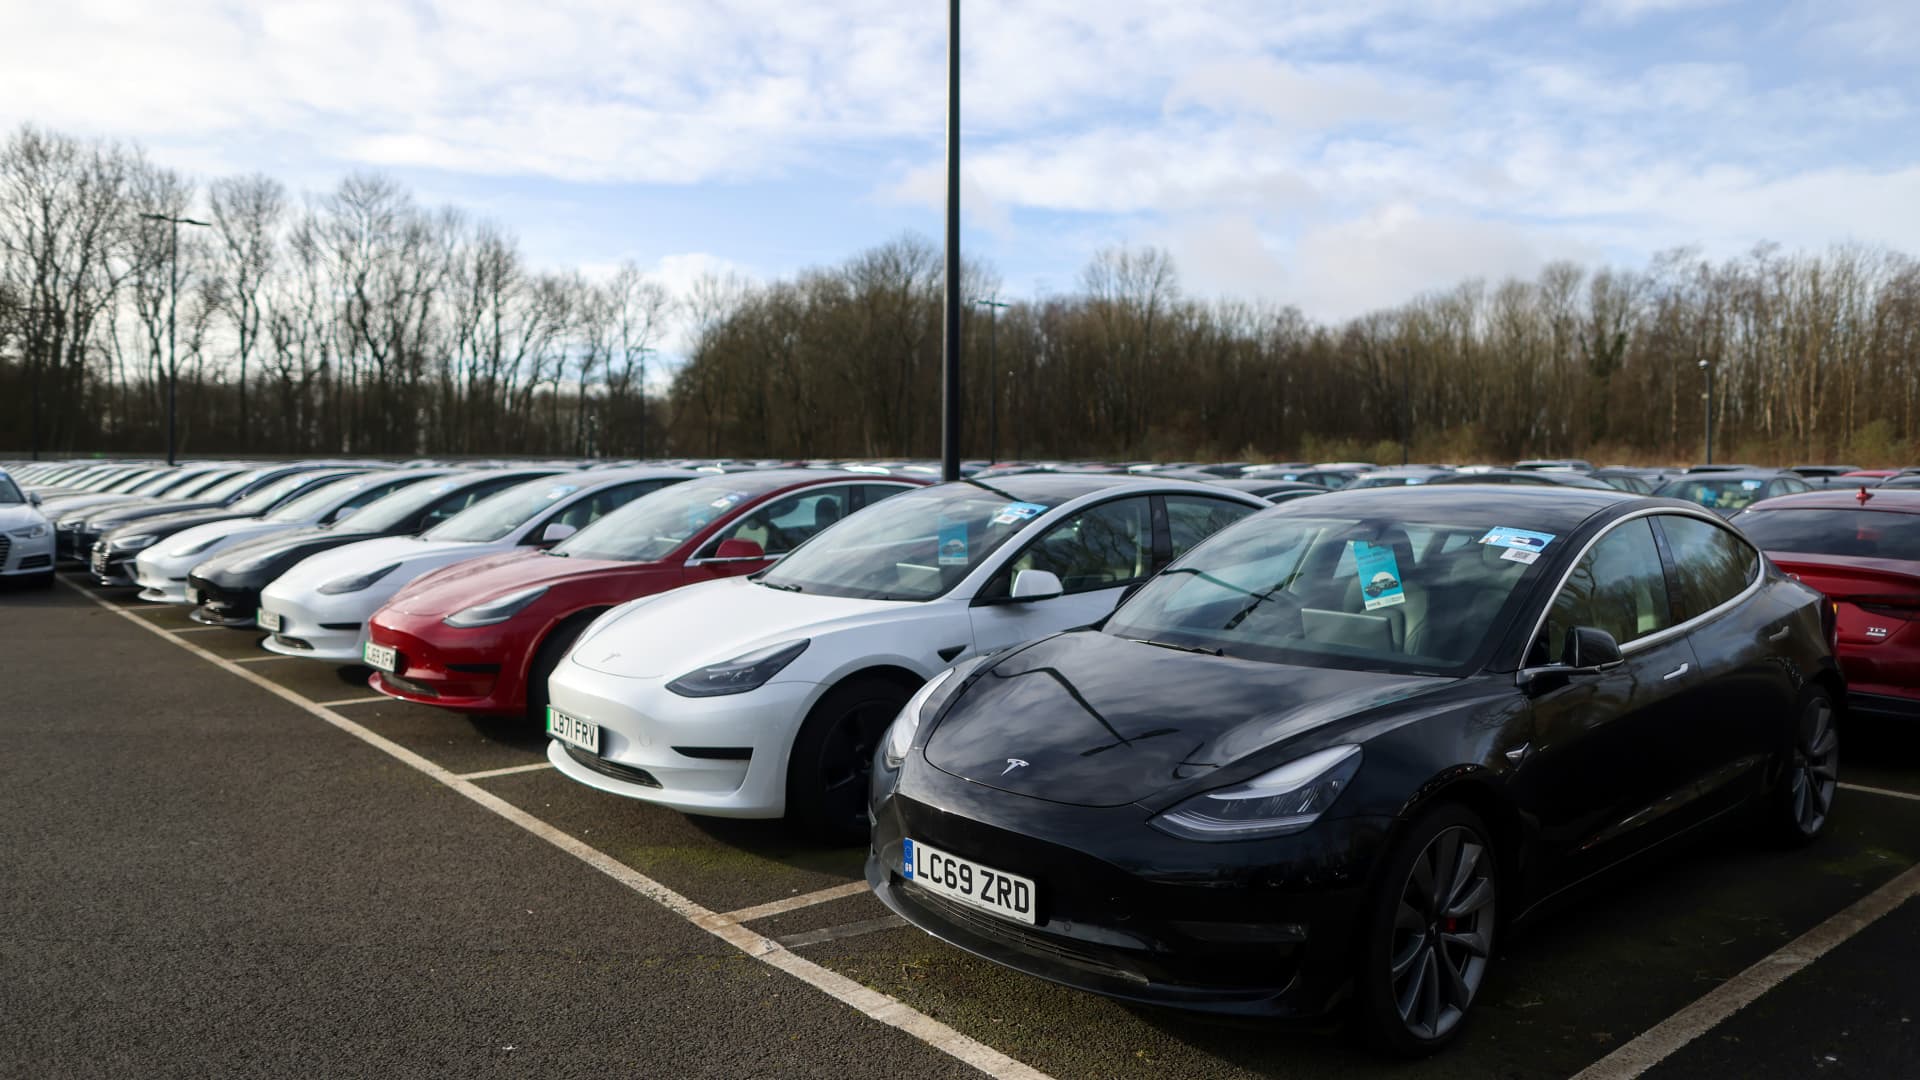 Why one Tesla manager thinks used cars are 'absolutely pivotal' for EVs